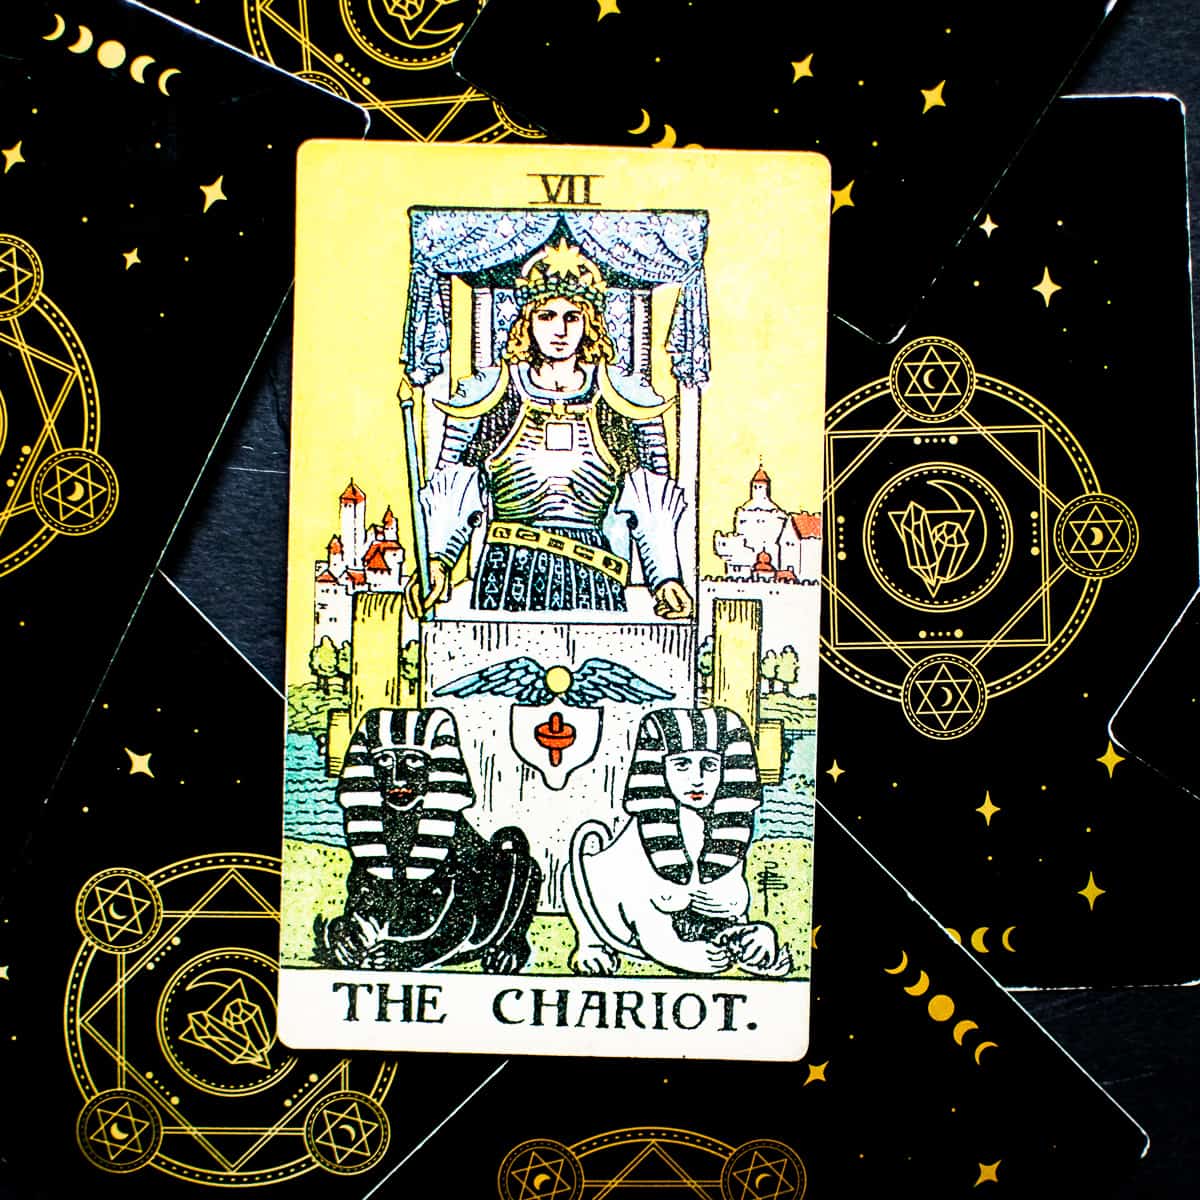 The Chariot card from the original Rider Waite tarot deck illustration.